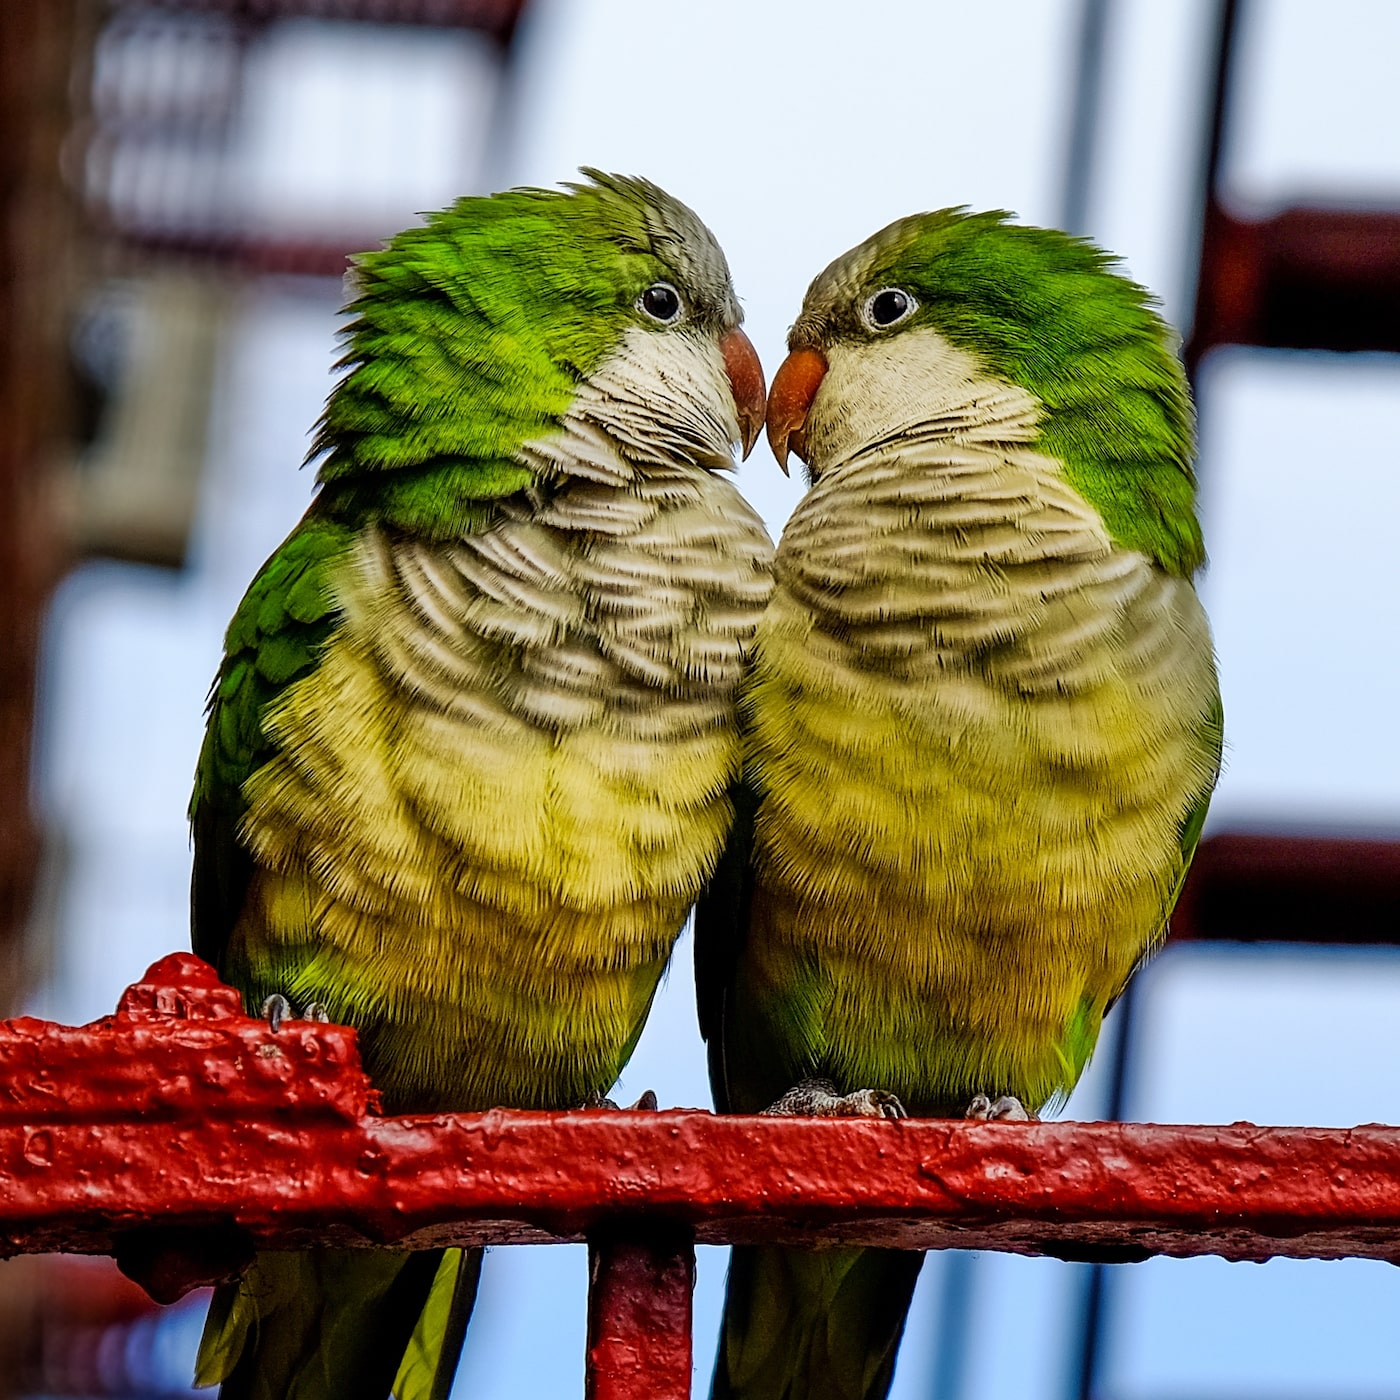 two green and yellow parrots touch their beaks together perched on a red railing